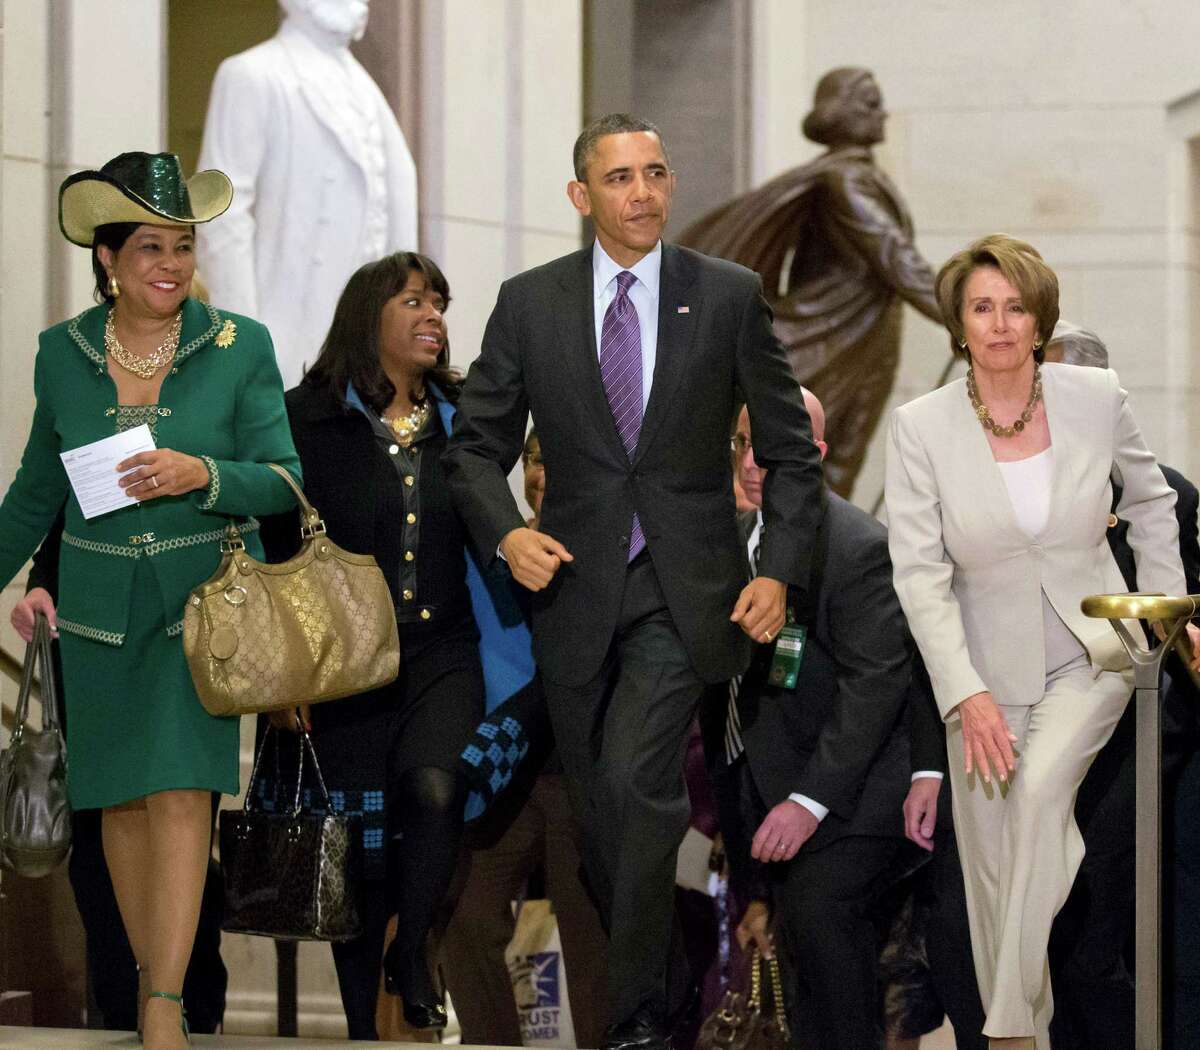 President Barack Obama and House Minority Leader Nancy Pelosi, D-Calif., leave a meeting with House Democrats at the Capitol, in Washington, Thursday, March 14, 2013. At far left is Rep. Frederica Wilson, D-Fla., with Rep. Terri Sewell, D-Ala., second from left. (AP Photo/J. Scott Applewhite)